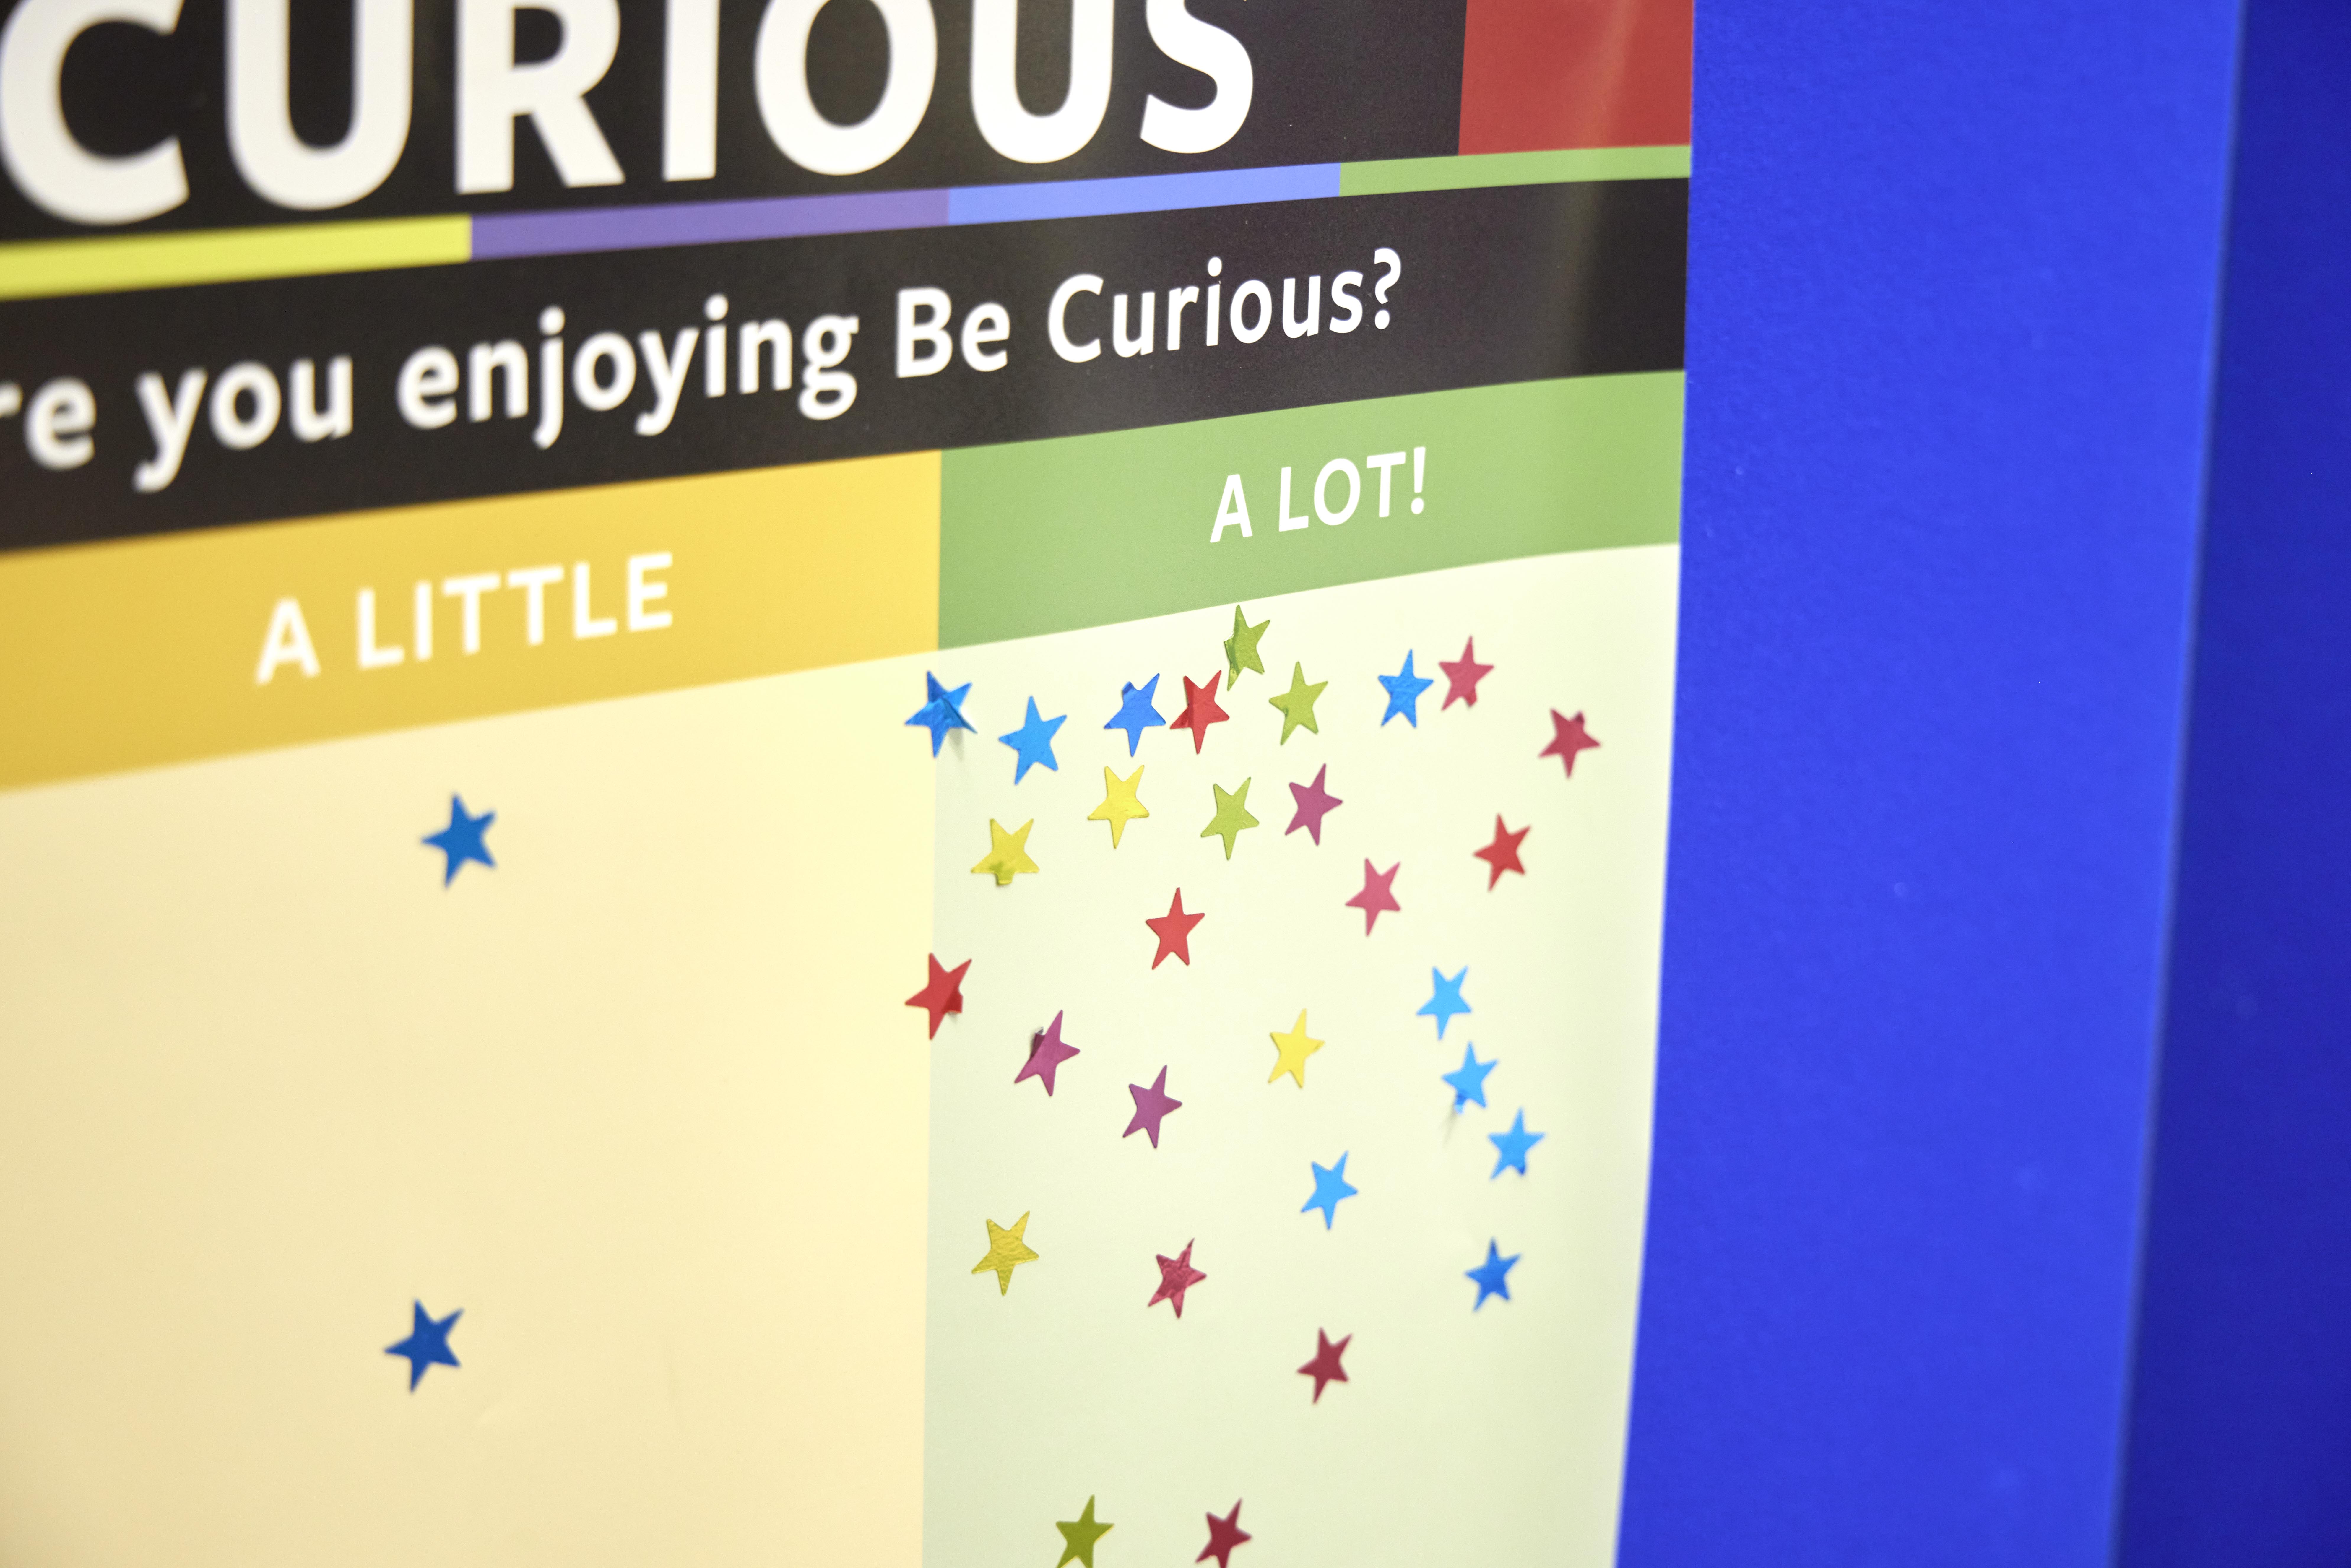 A chart titled "Are you enjoying Be Curious?" with two columns titled "A little" and "A lot!" There are lots of star stickers in the "A lot" column.